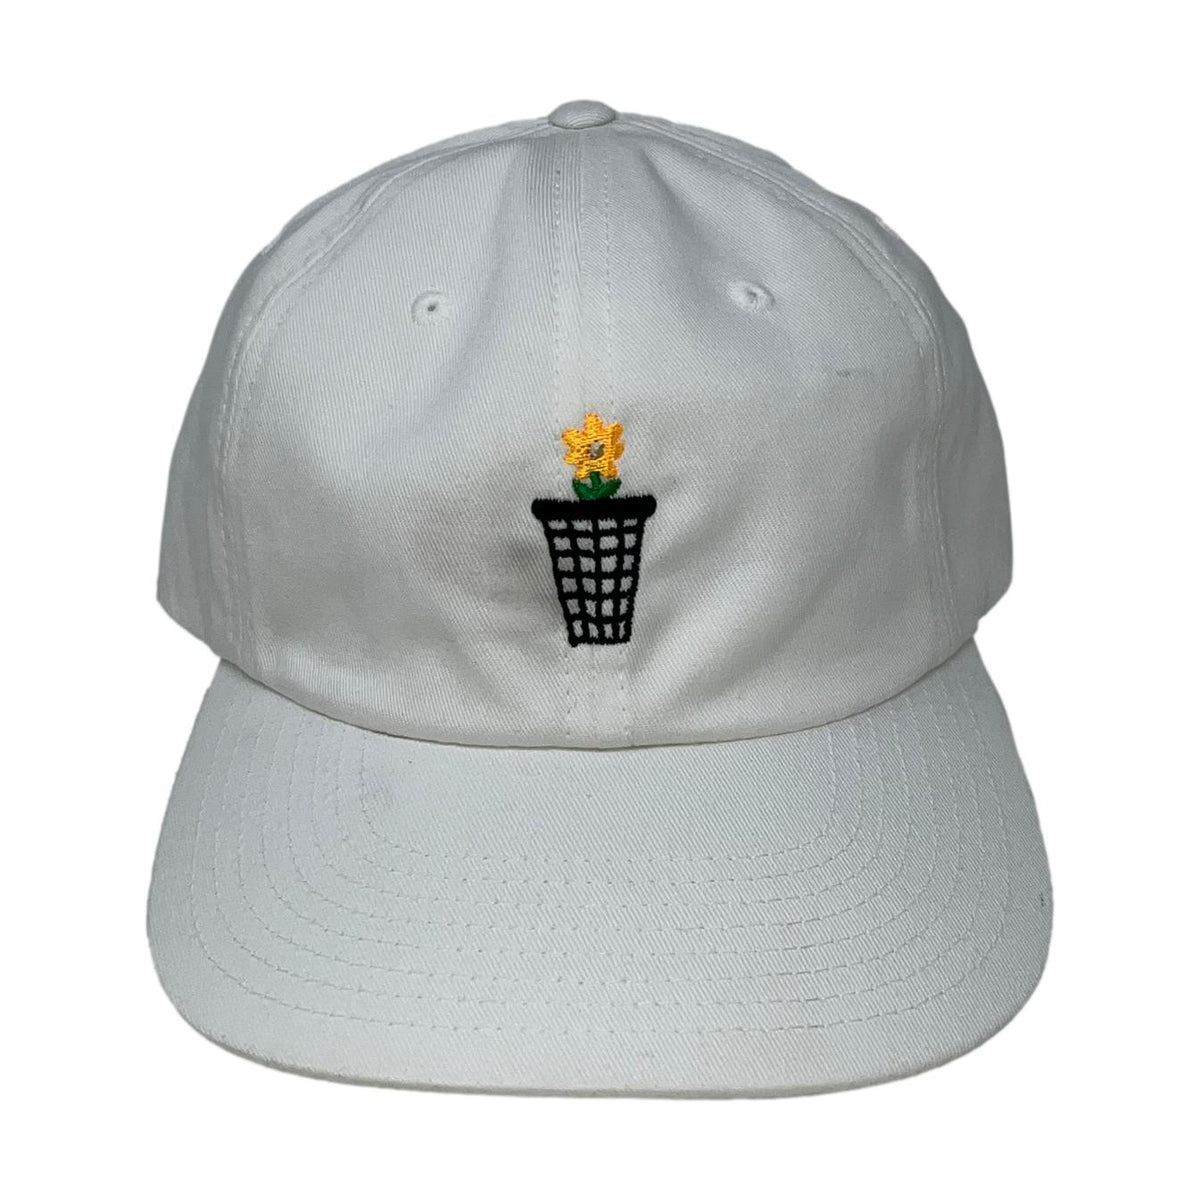 Venue Trashcan Embroidered 6 Panel Hat White